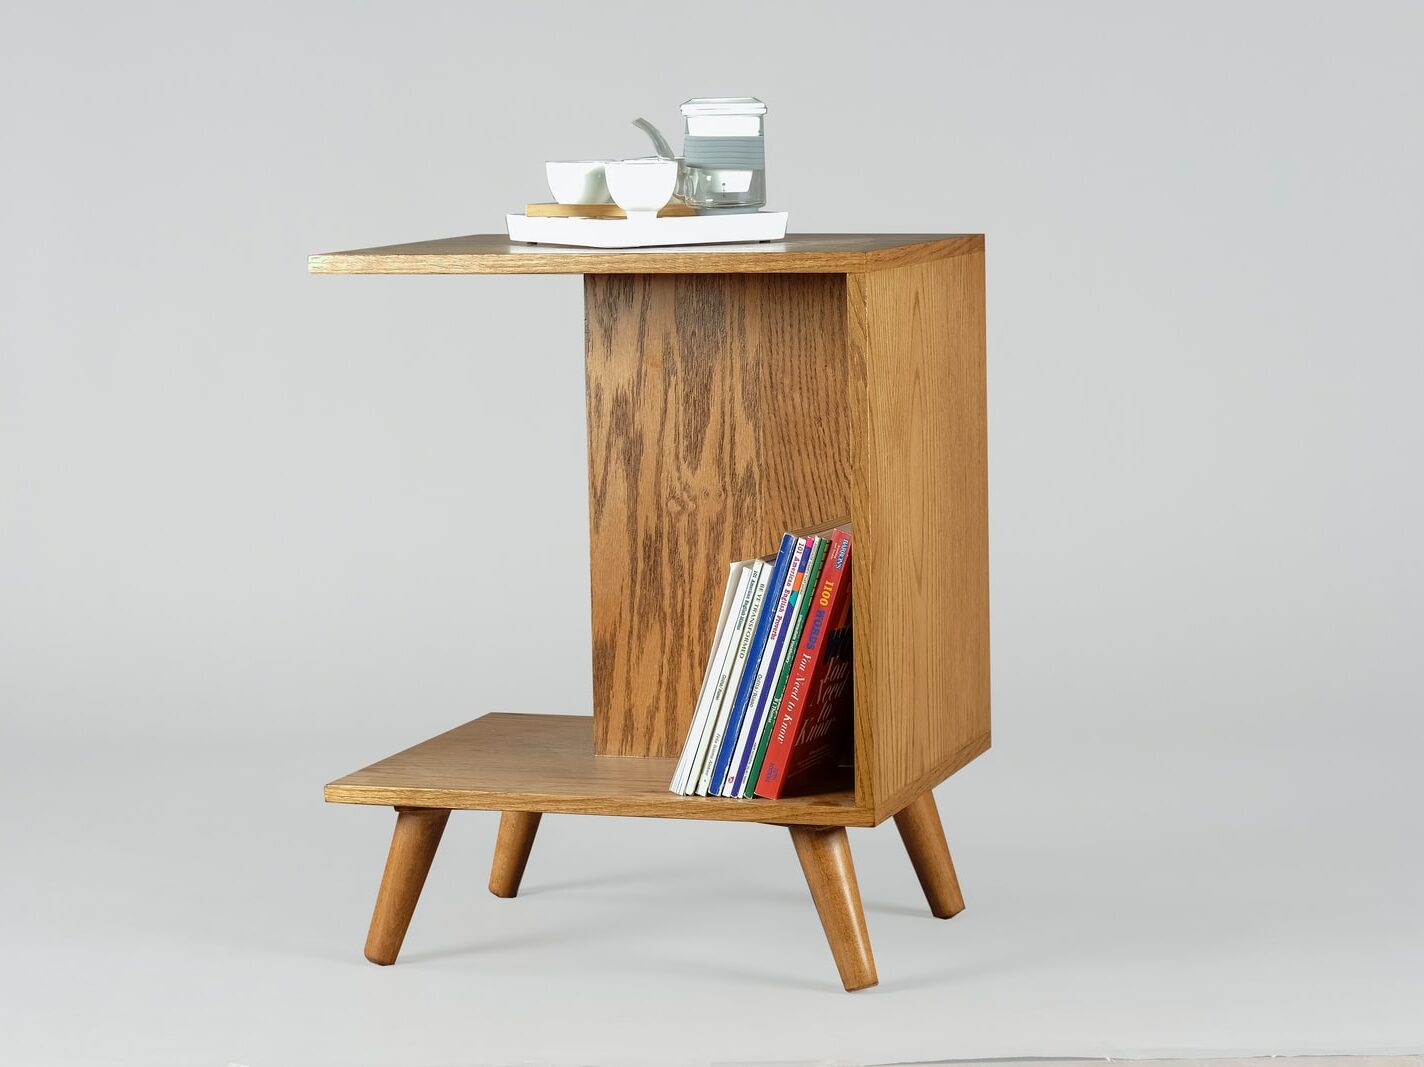 brown wooden table with books and mugs